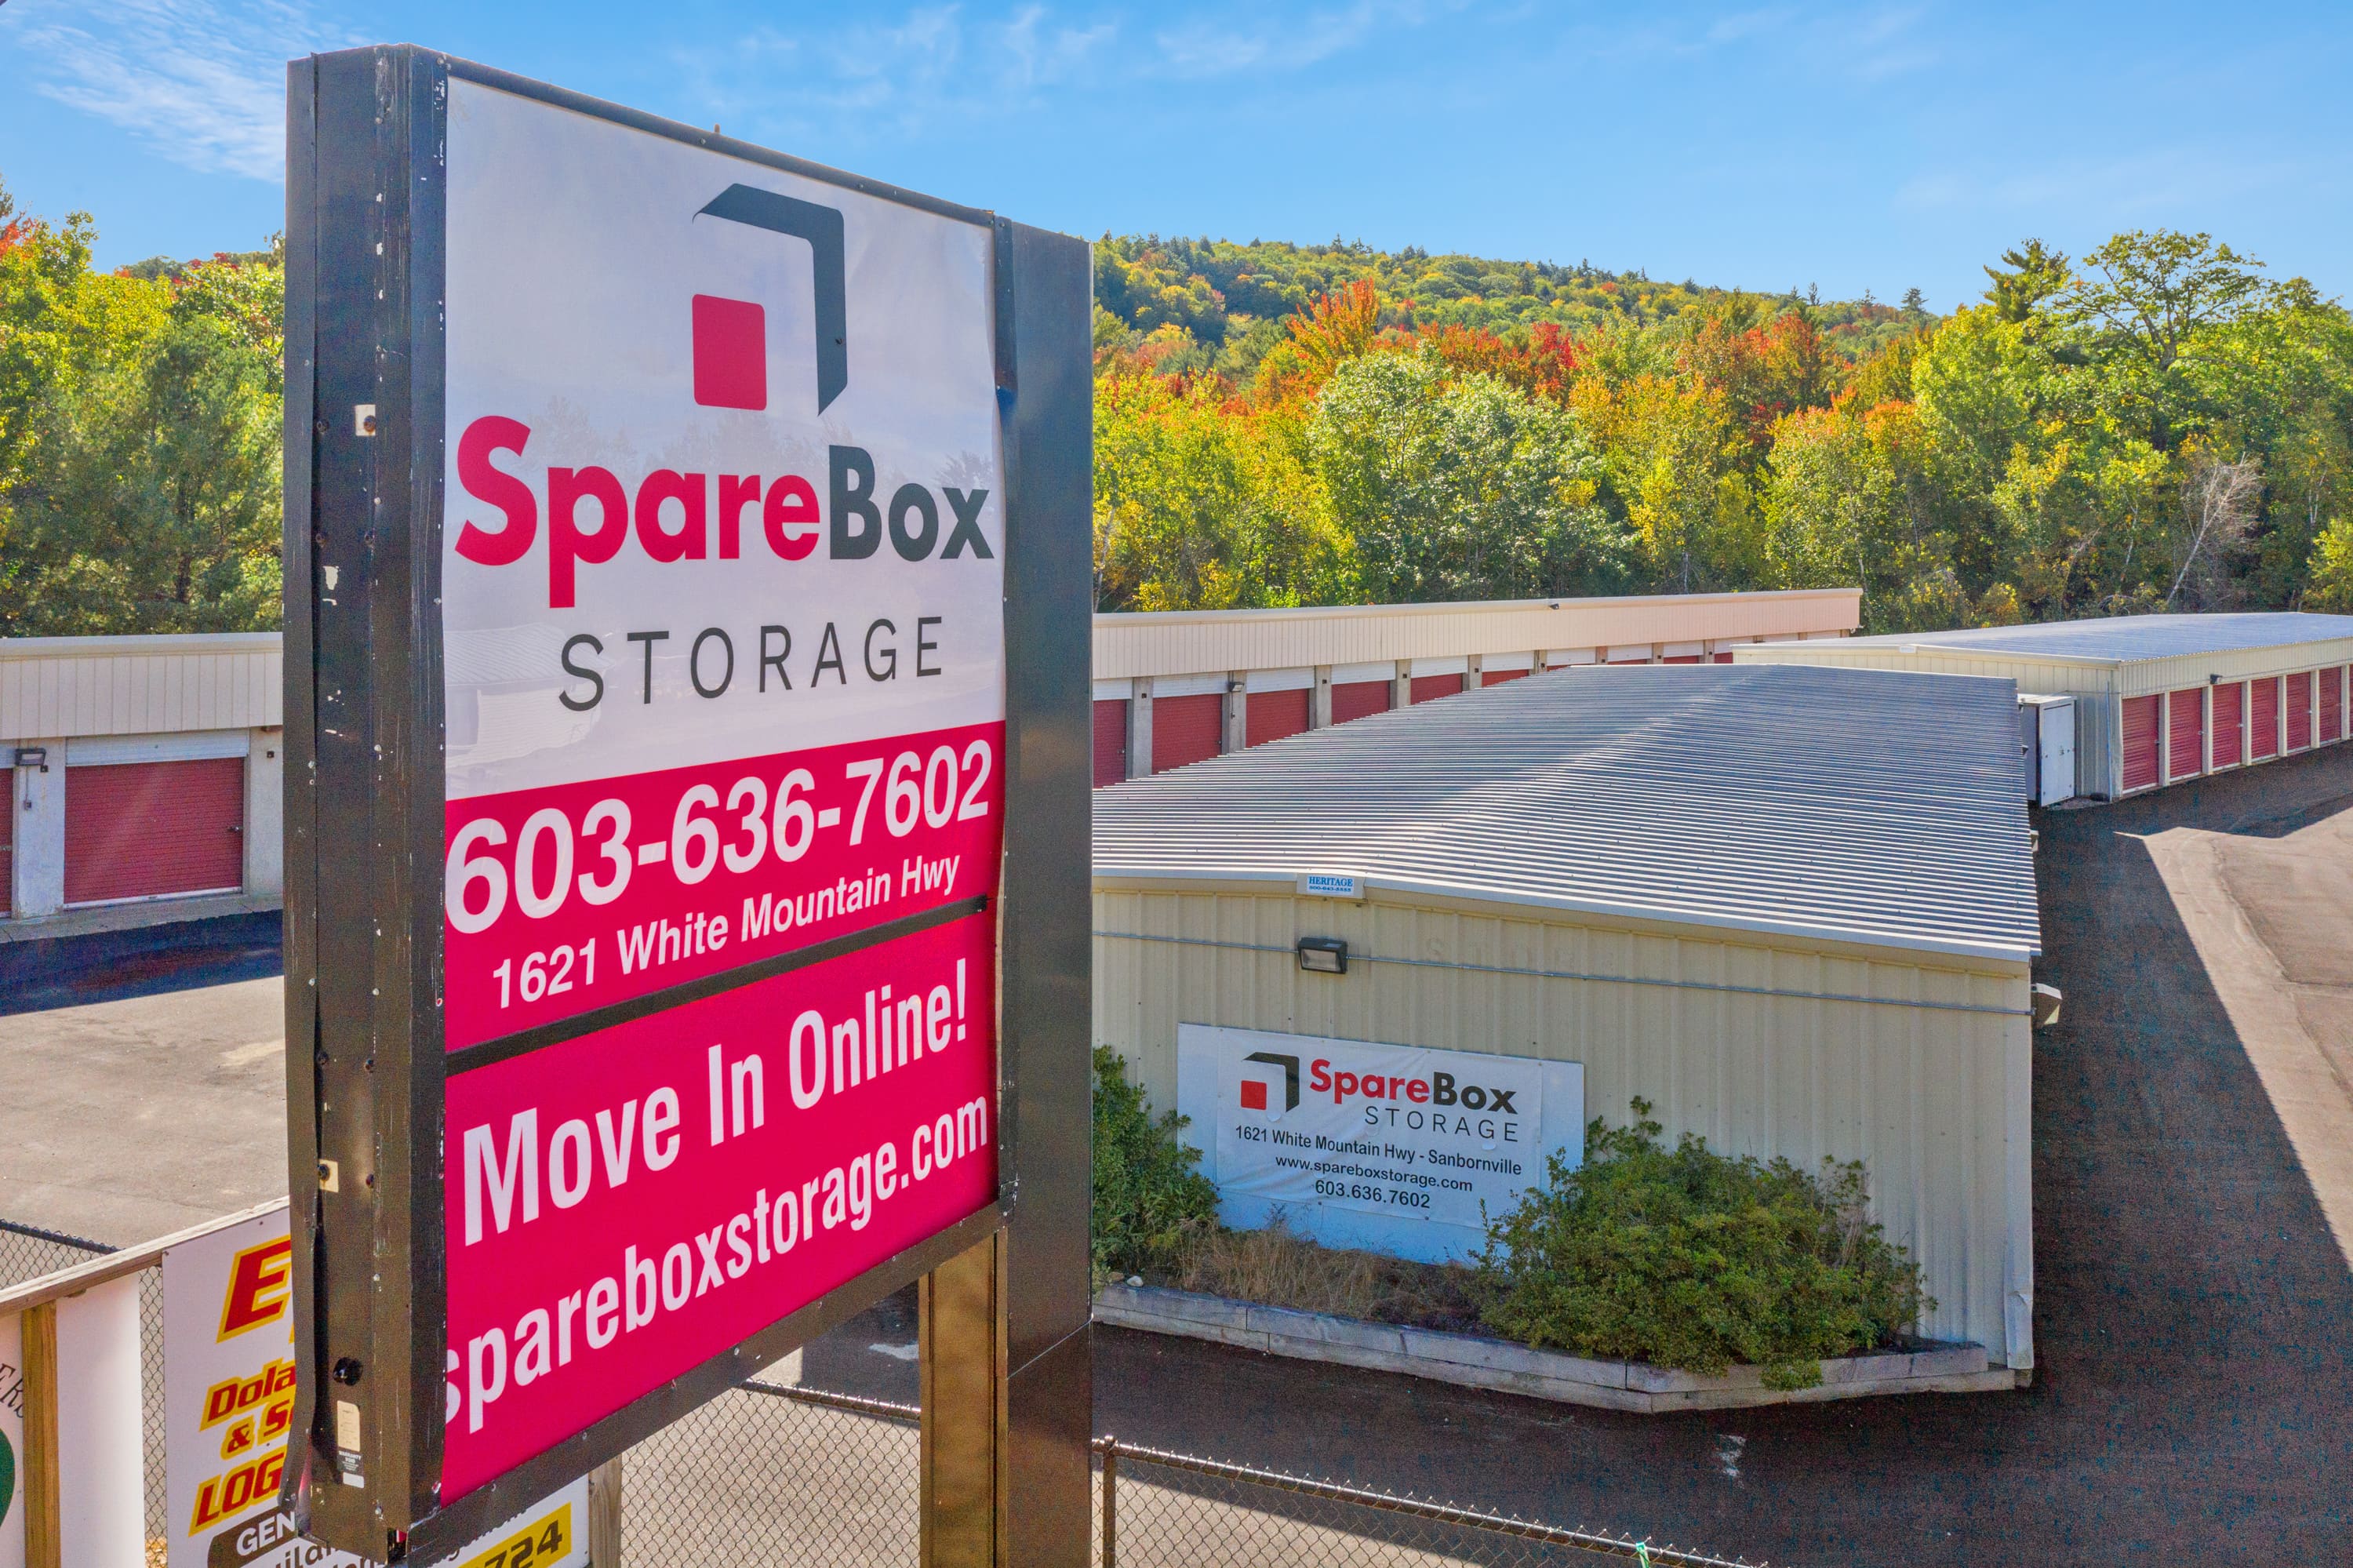 Meet all of your self storage needs in Wakefield, NH with our SpareBox Storage location on White Mountain Highway.